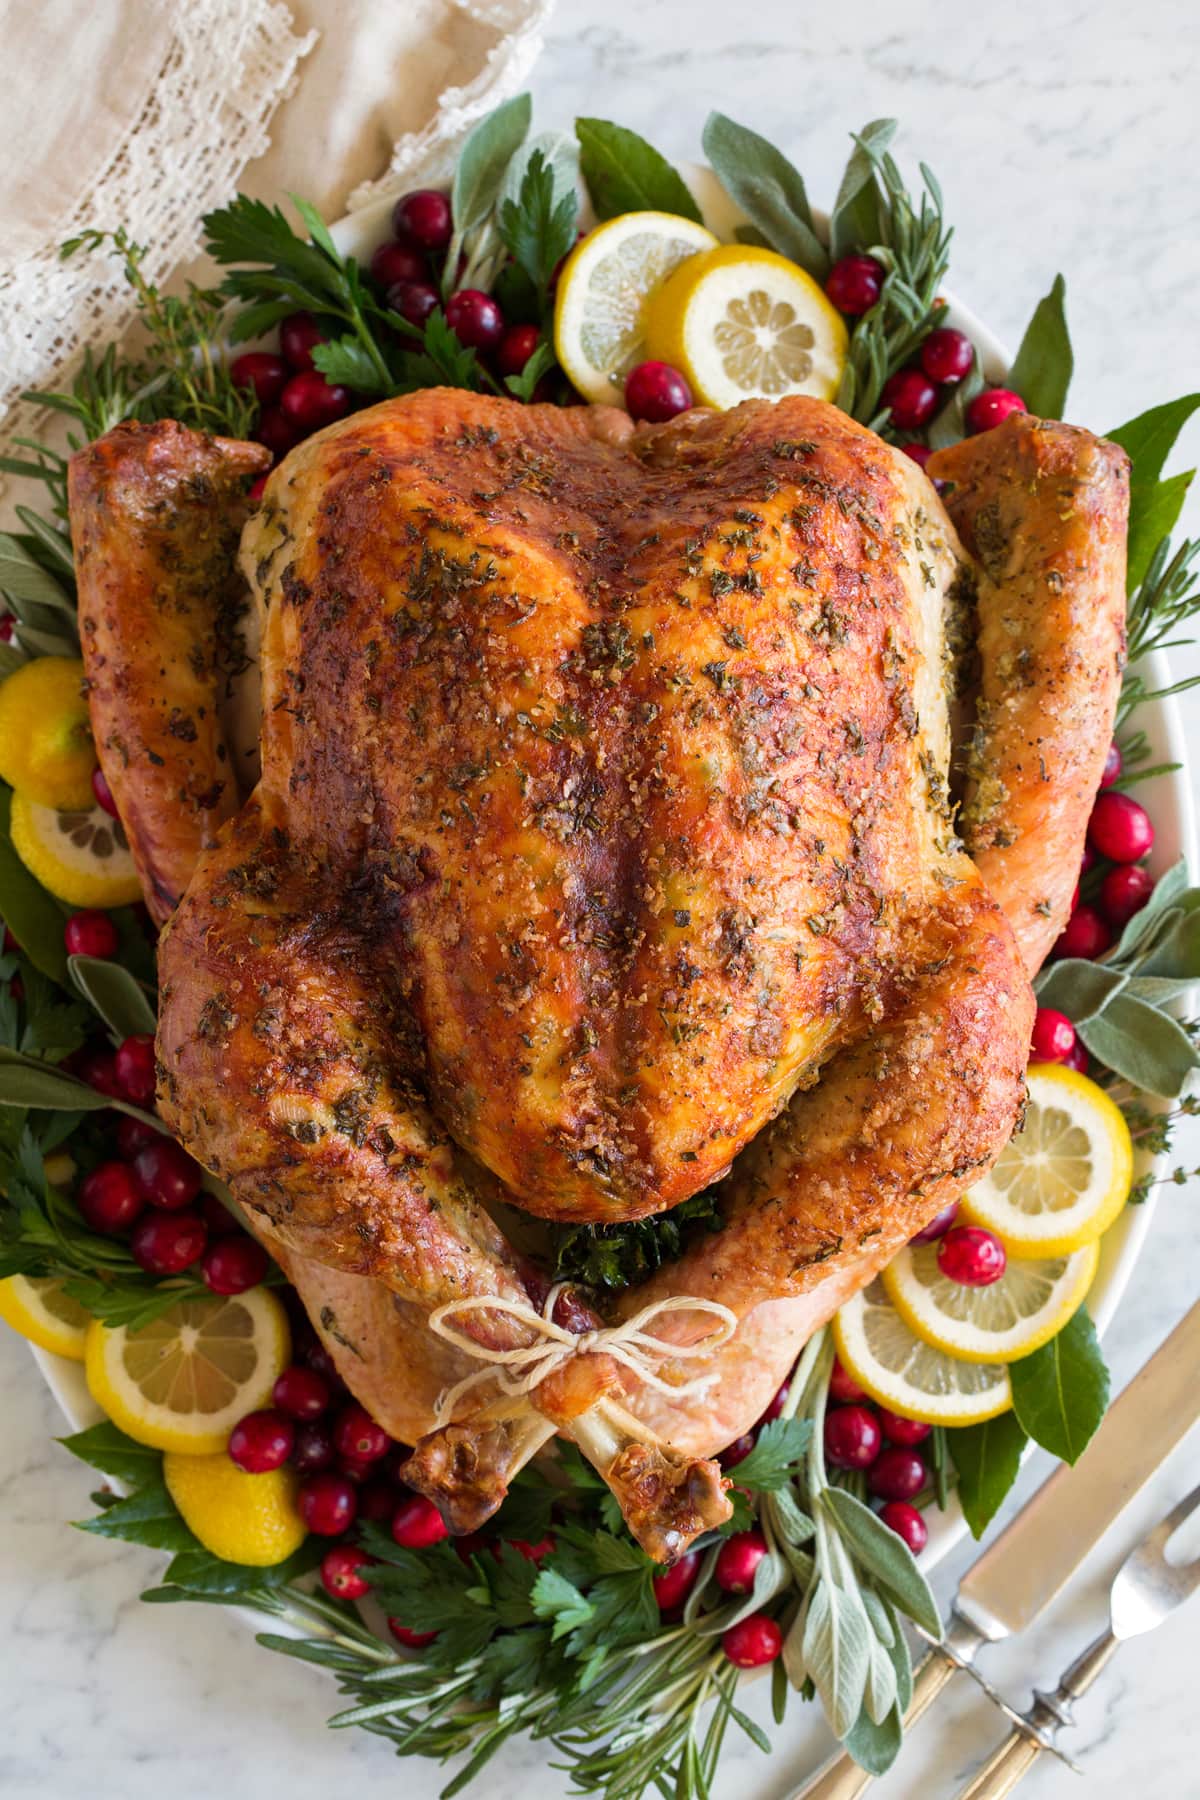 How Many Turkeys Are Cooked for Thanksgiving Each Year?